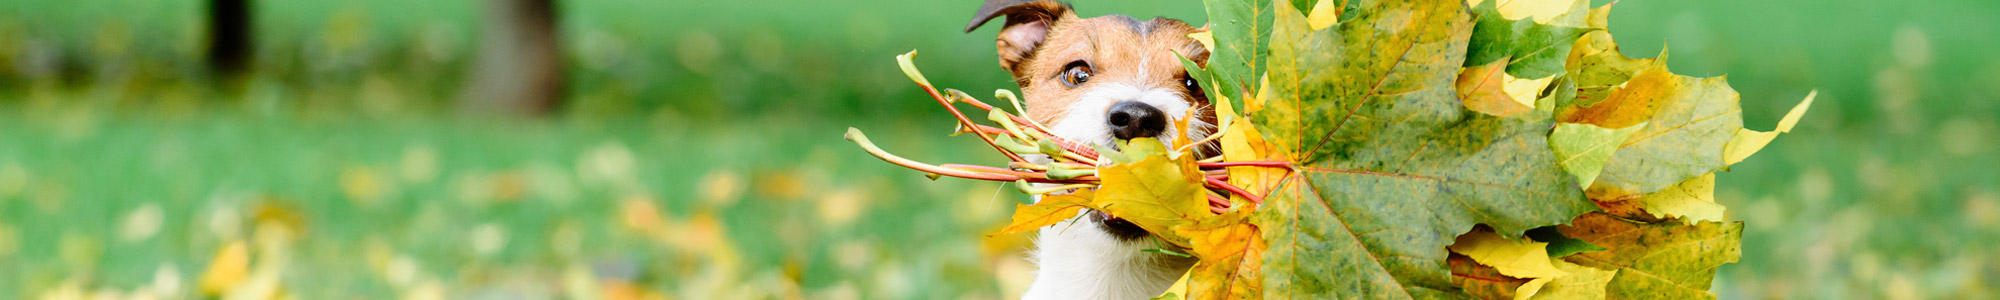 cute dog with a collection of fall leaves in its mouth